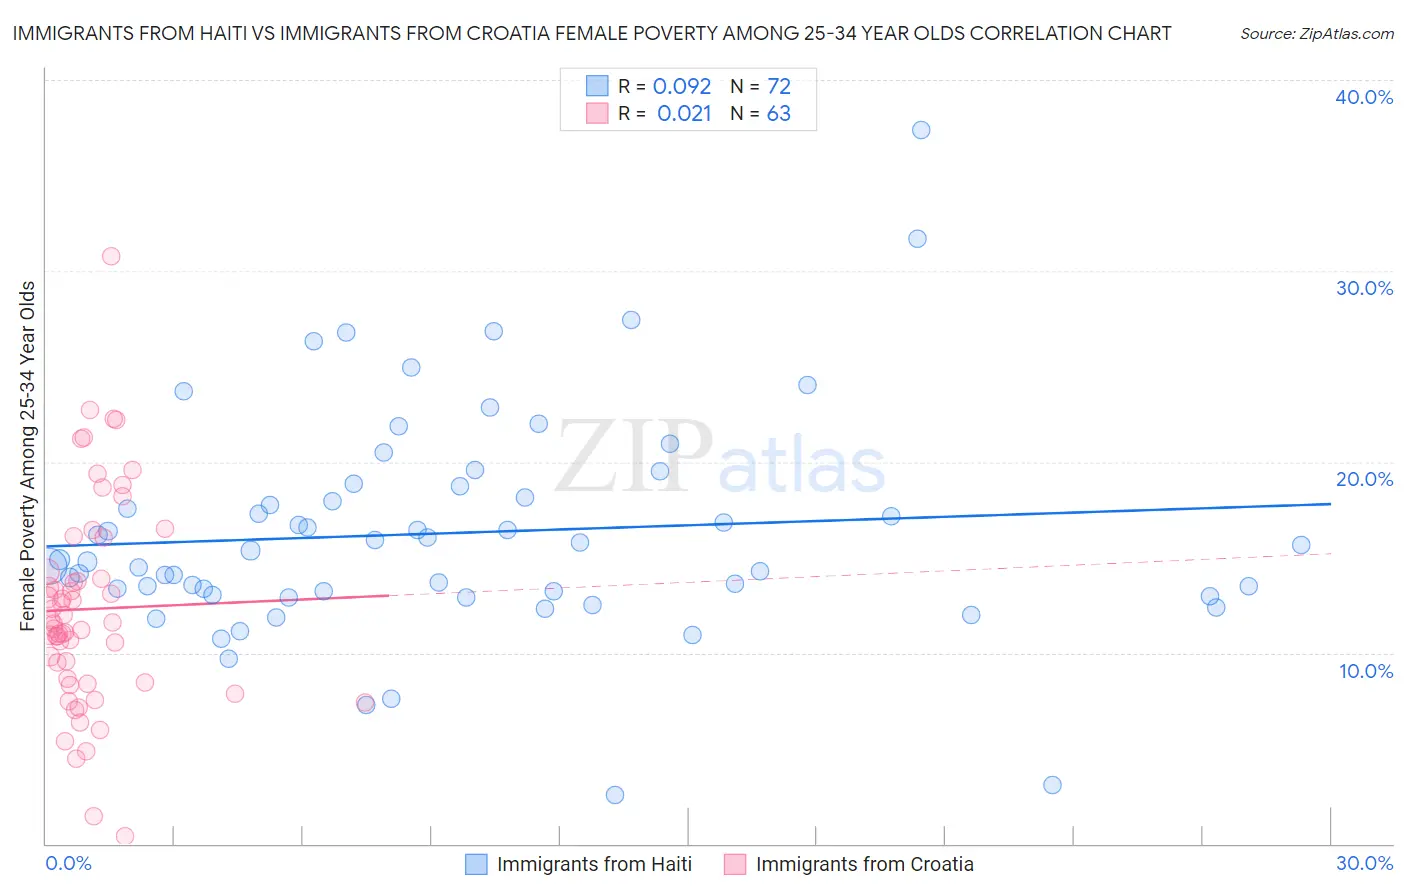 Immigrants from Haiti vs Immigrants from Croatia Female Poverty Among 25-34 Year Olds